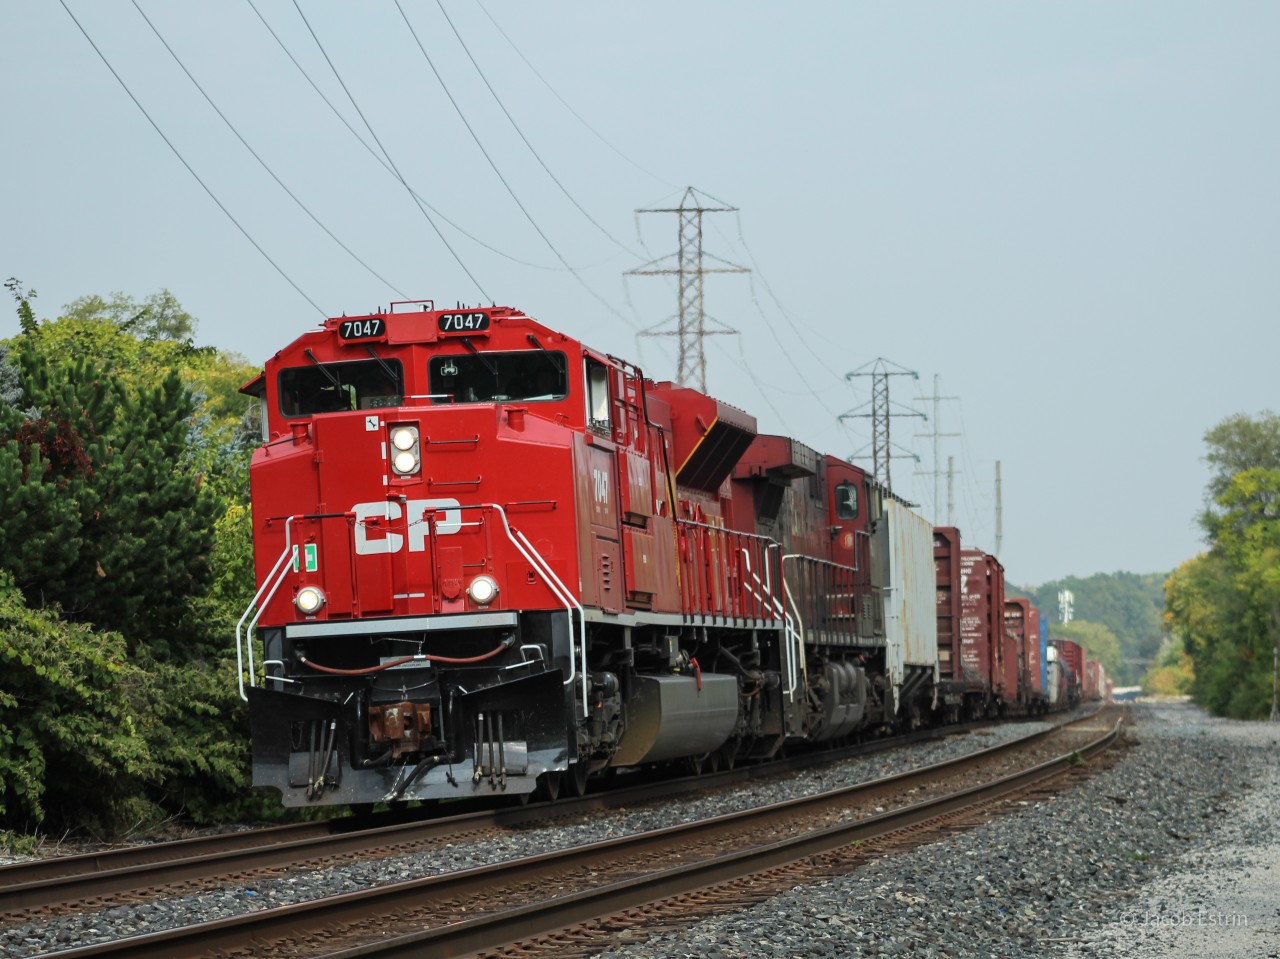 CP 7047 leads 421-24 West on the North Toronto Subdivision with an ACU aswell as an AC44 providing power.